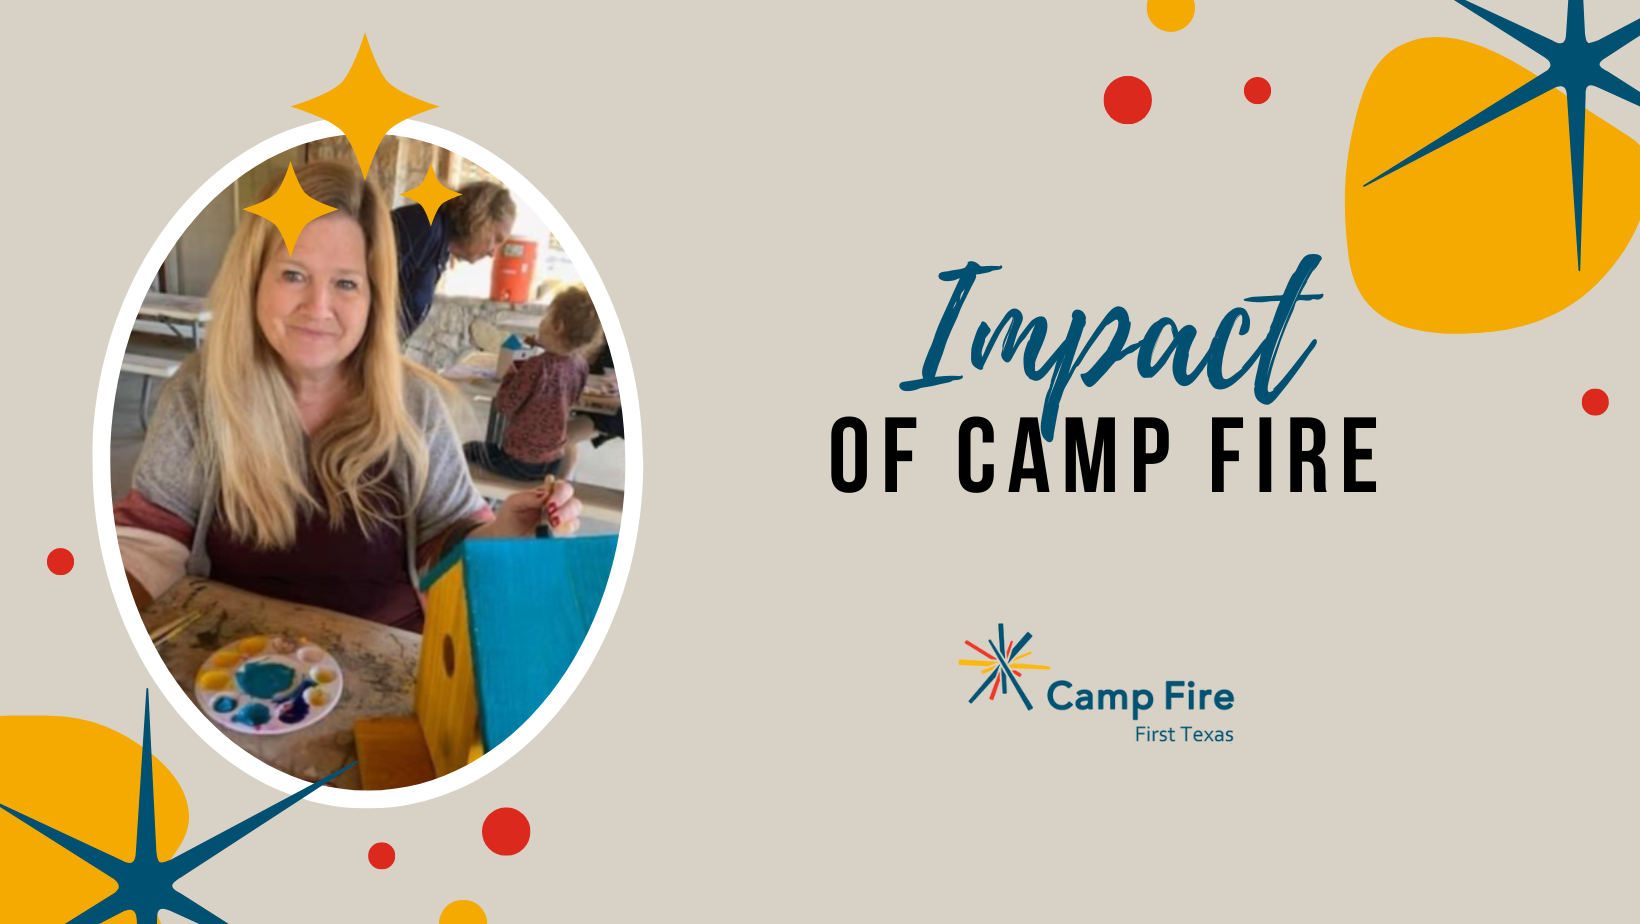 Impact of Camp Fire, a Camp Fire First Texas blog by Melanie Marshall